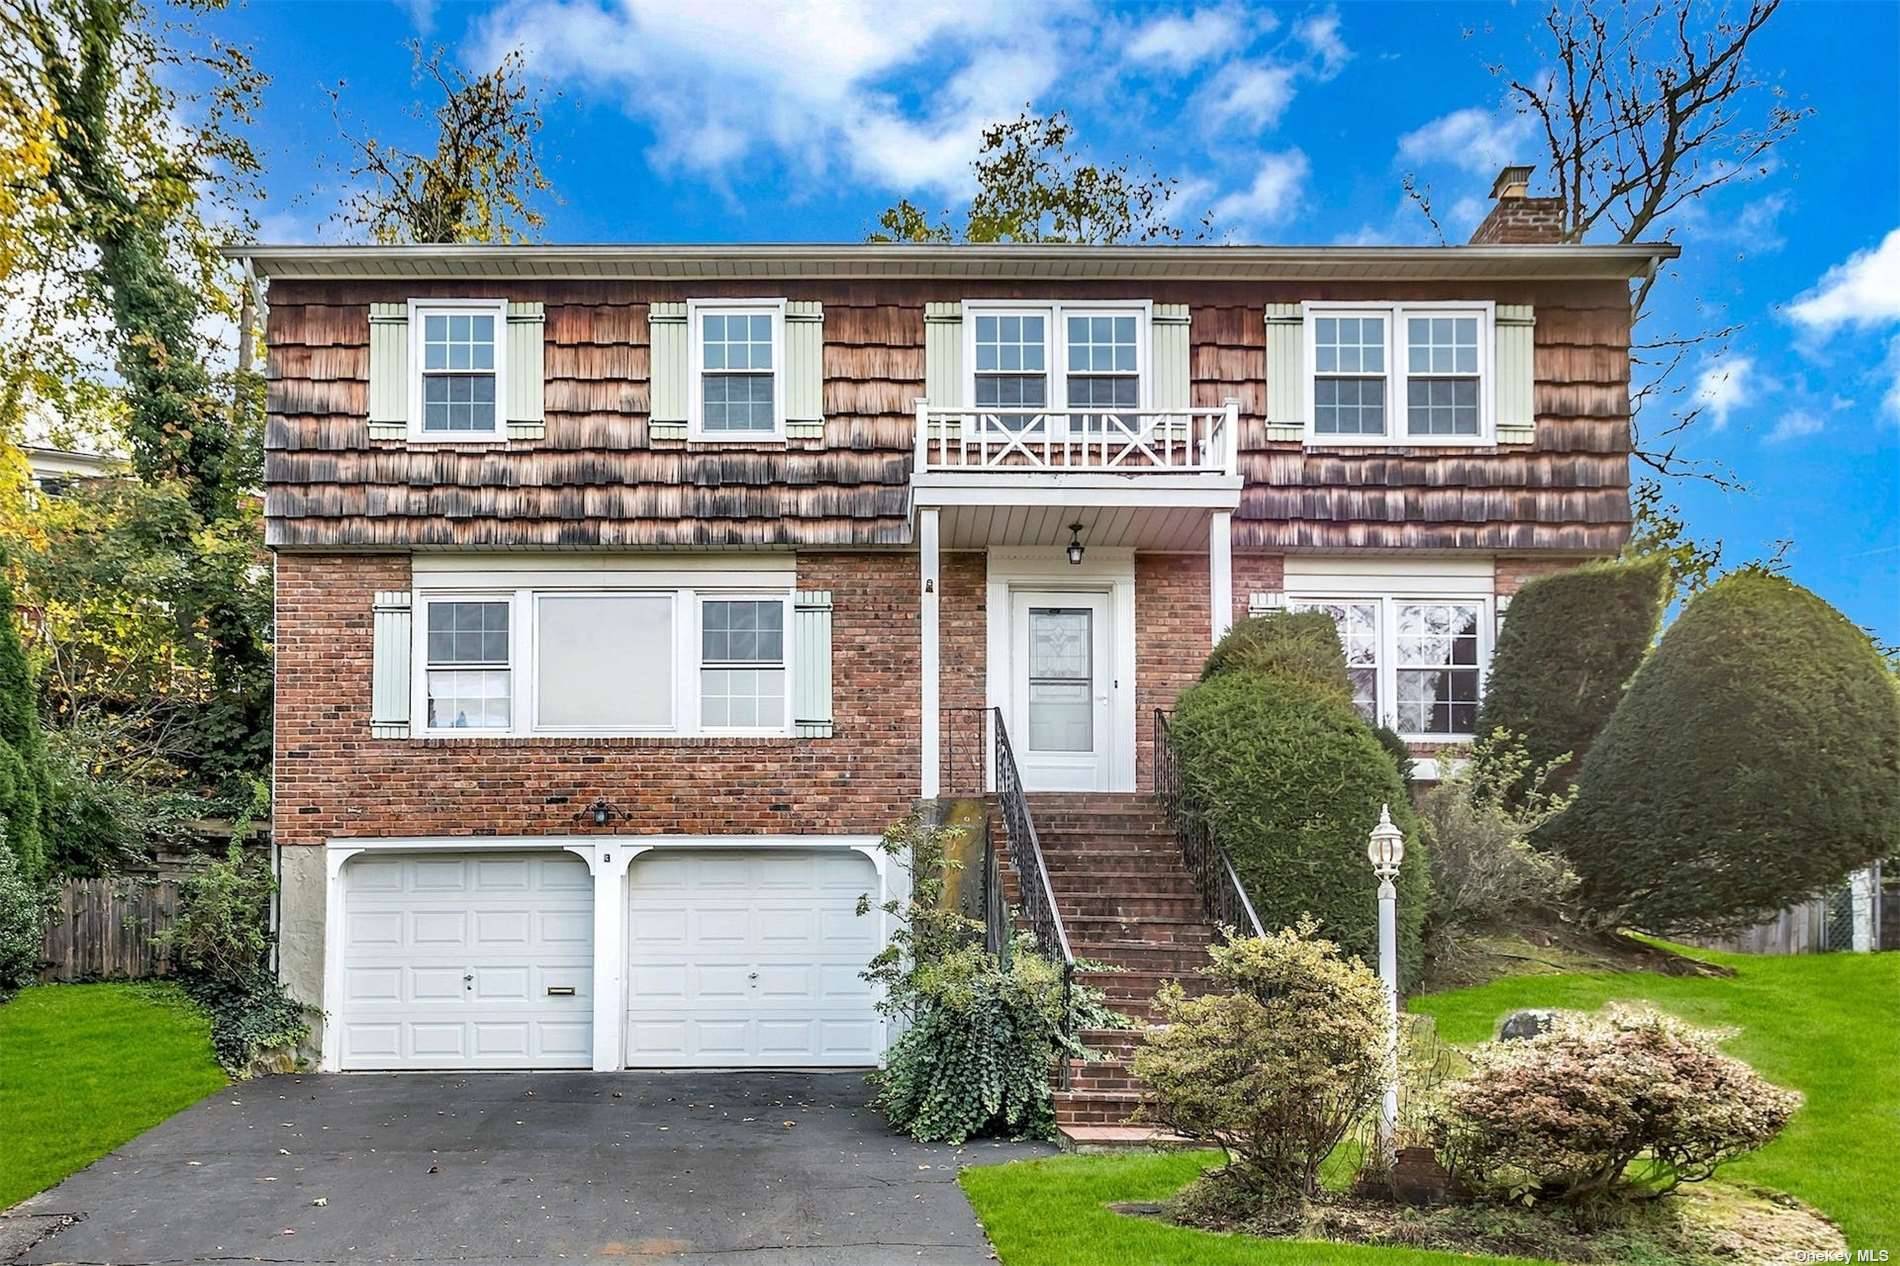 Beautifully Updated Four Bedroom Manhasset Colonial On a Cul De Sac.